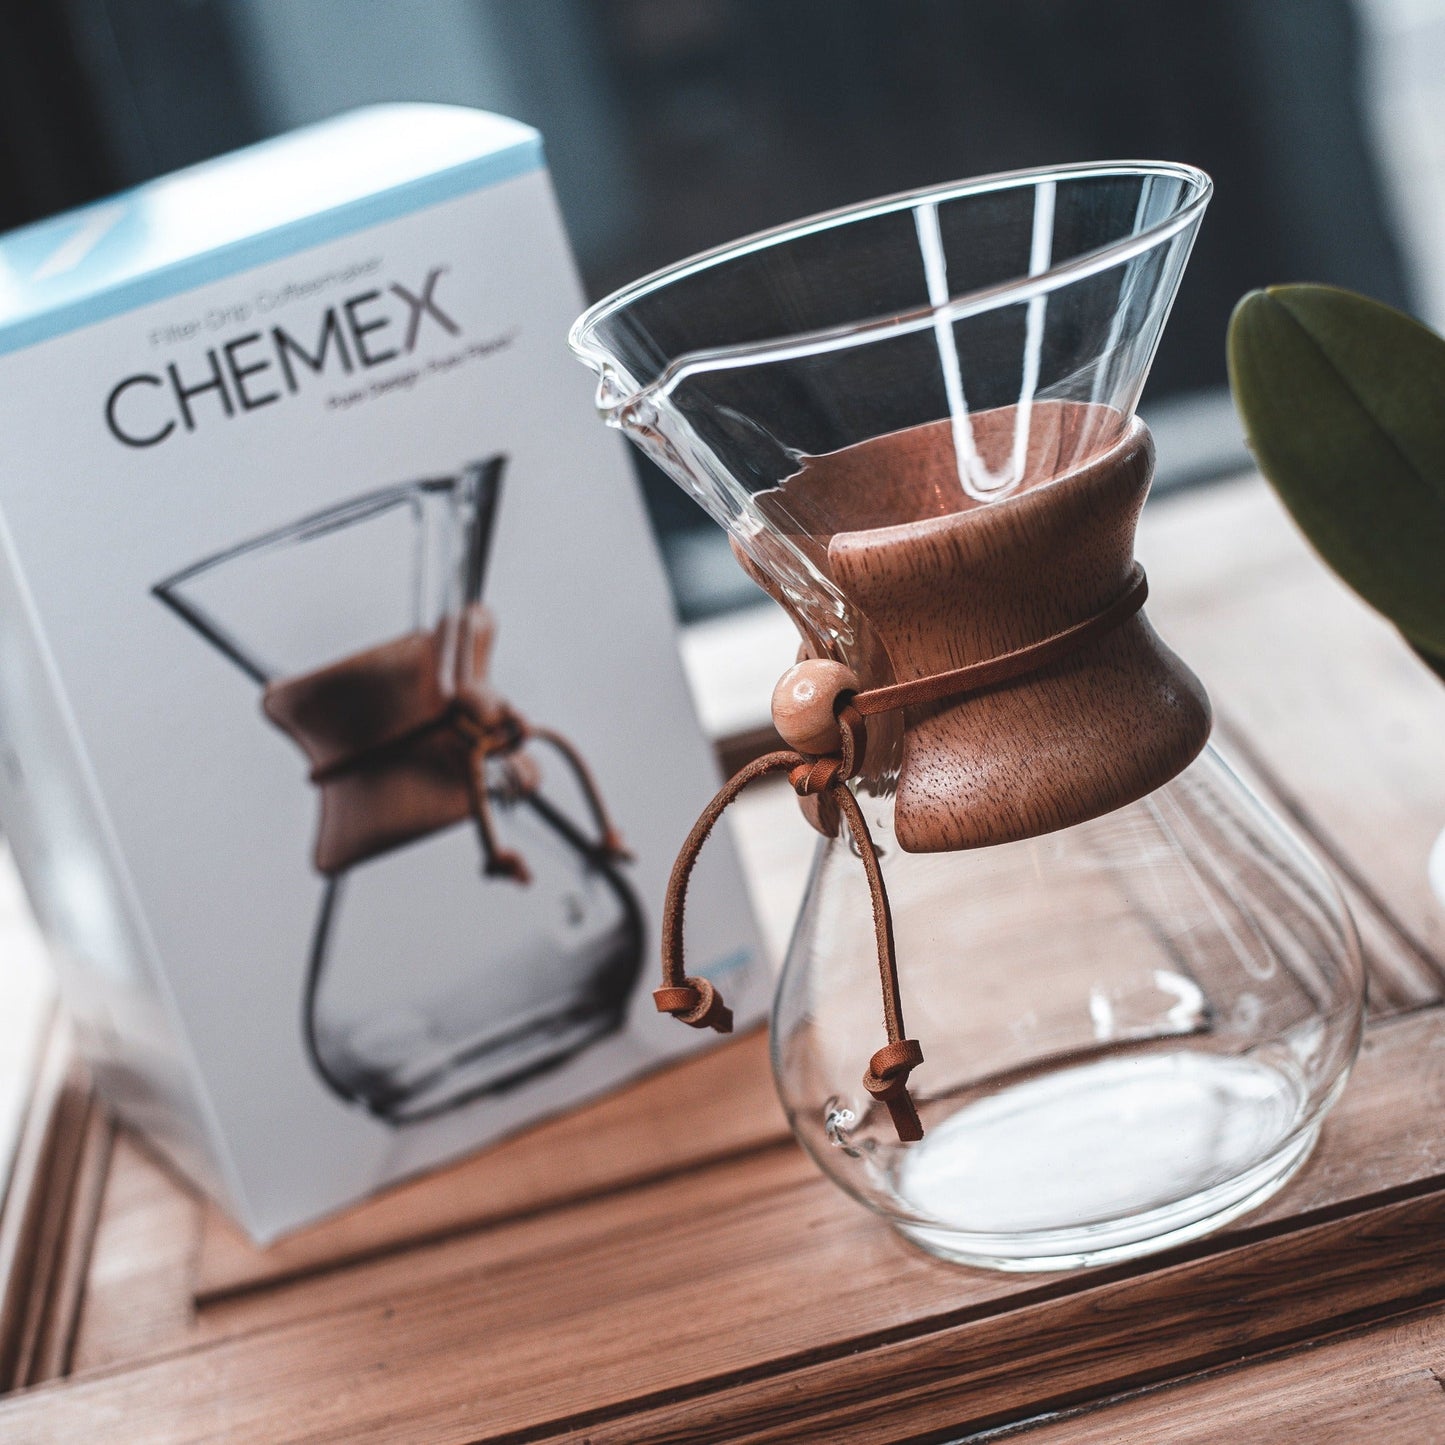 Chemex 6 Cup Glass Bottle with small Wooden Cover in the centre - Velo Coffee Roasters